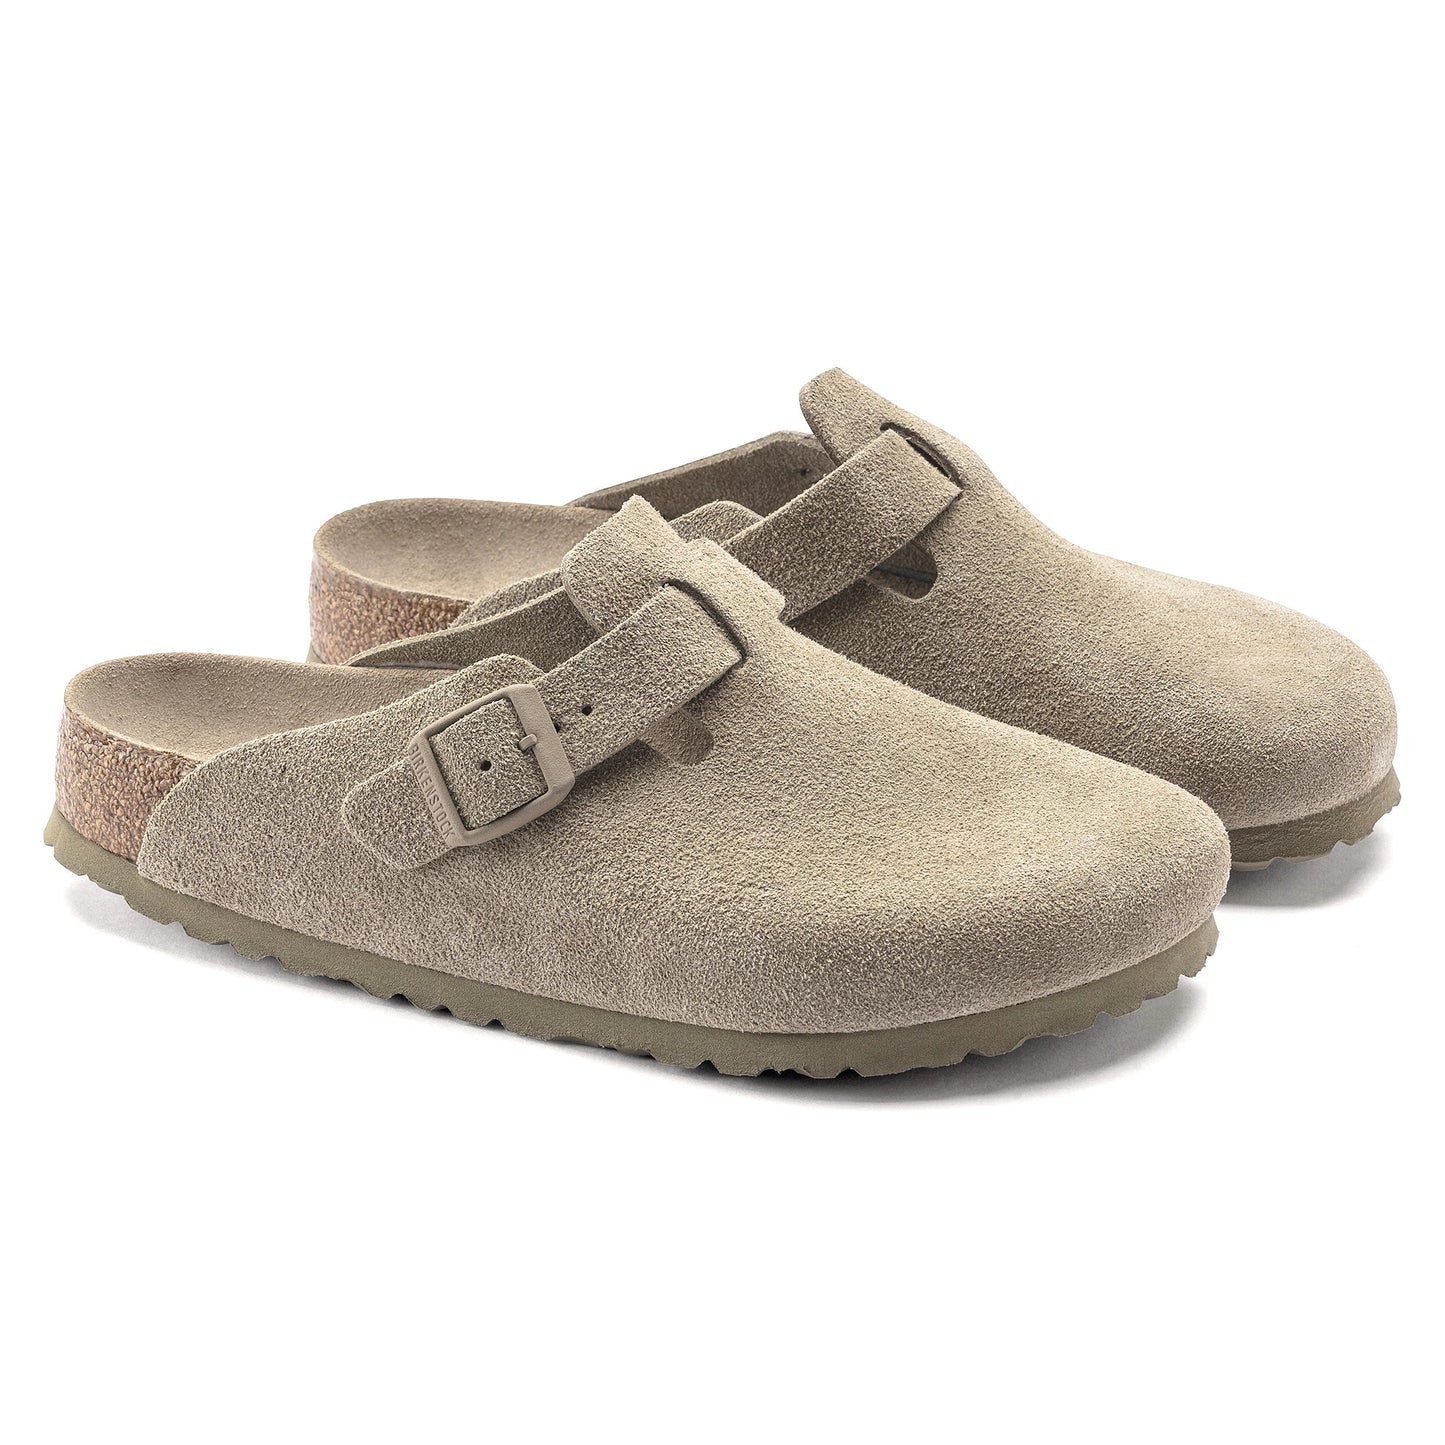 Birkenstock Boston Soft Footbed Suede Leather Faded Khaki Narrow Fit 1019108